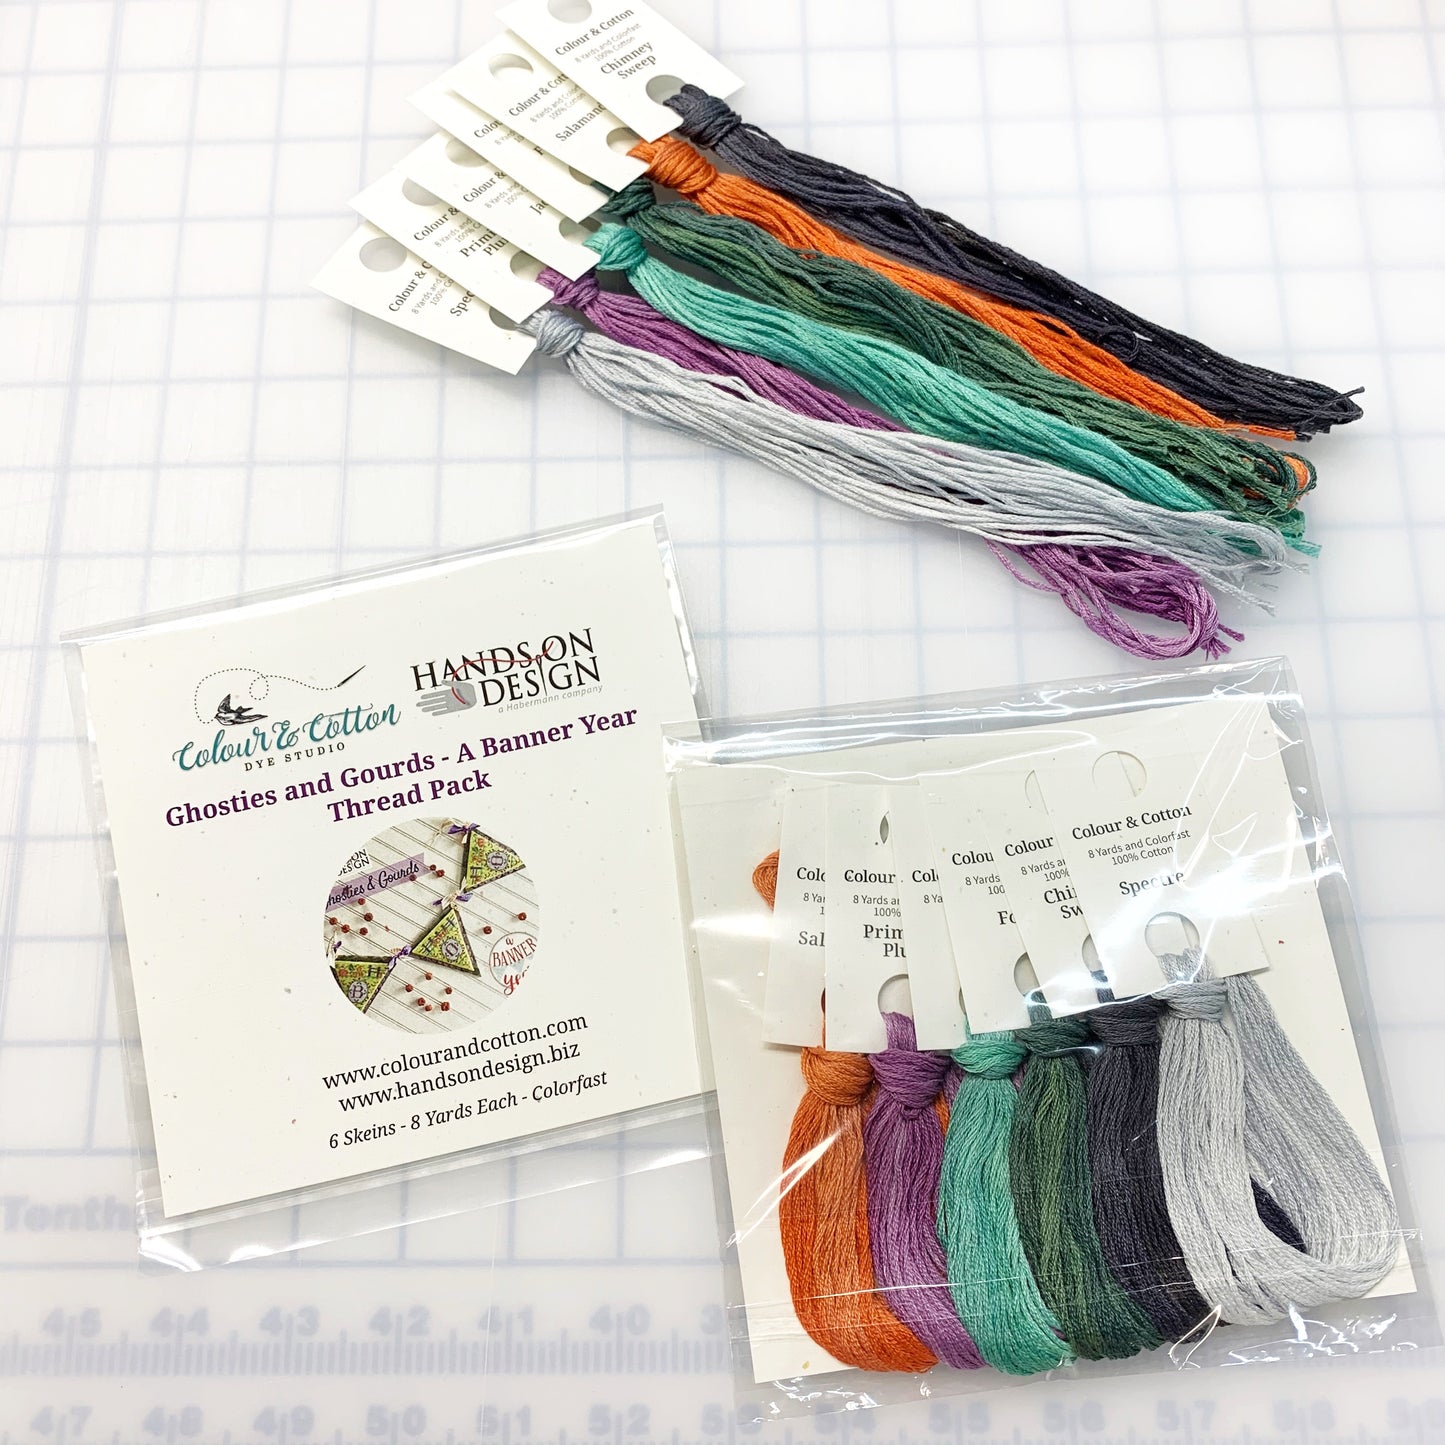 Thread Pack Ghosties and Gourds by Hands On Design